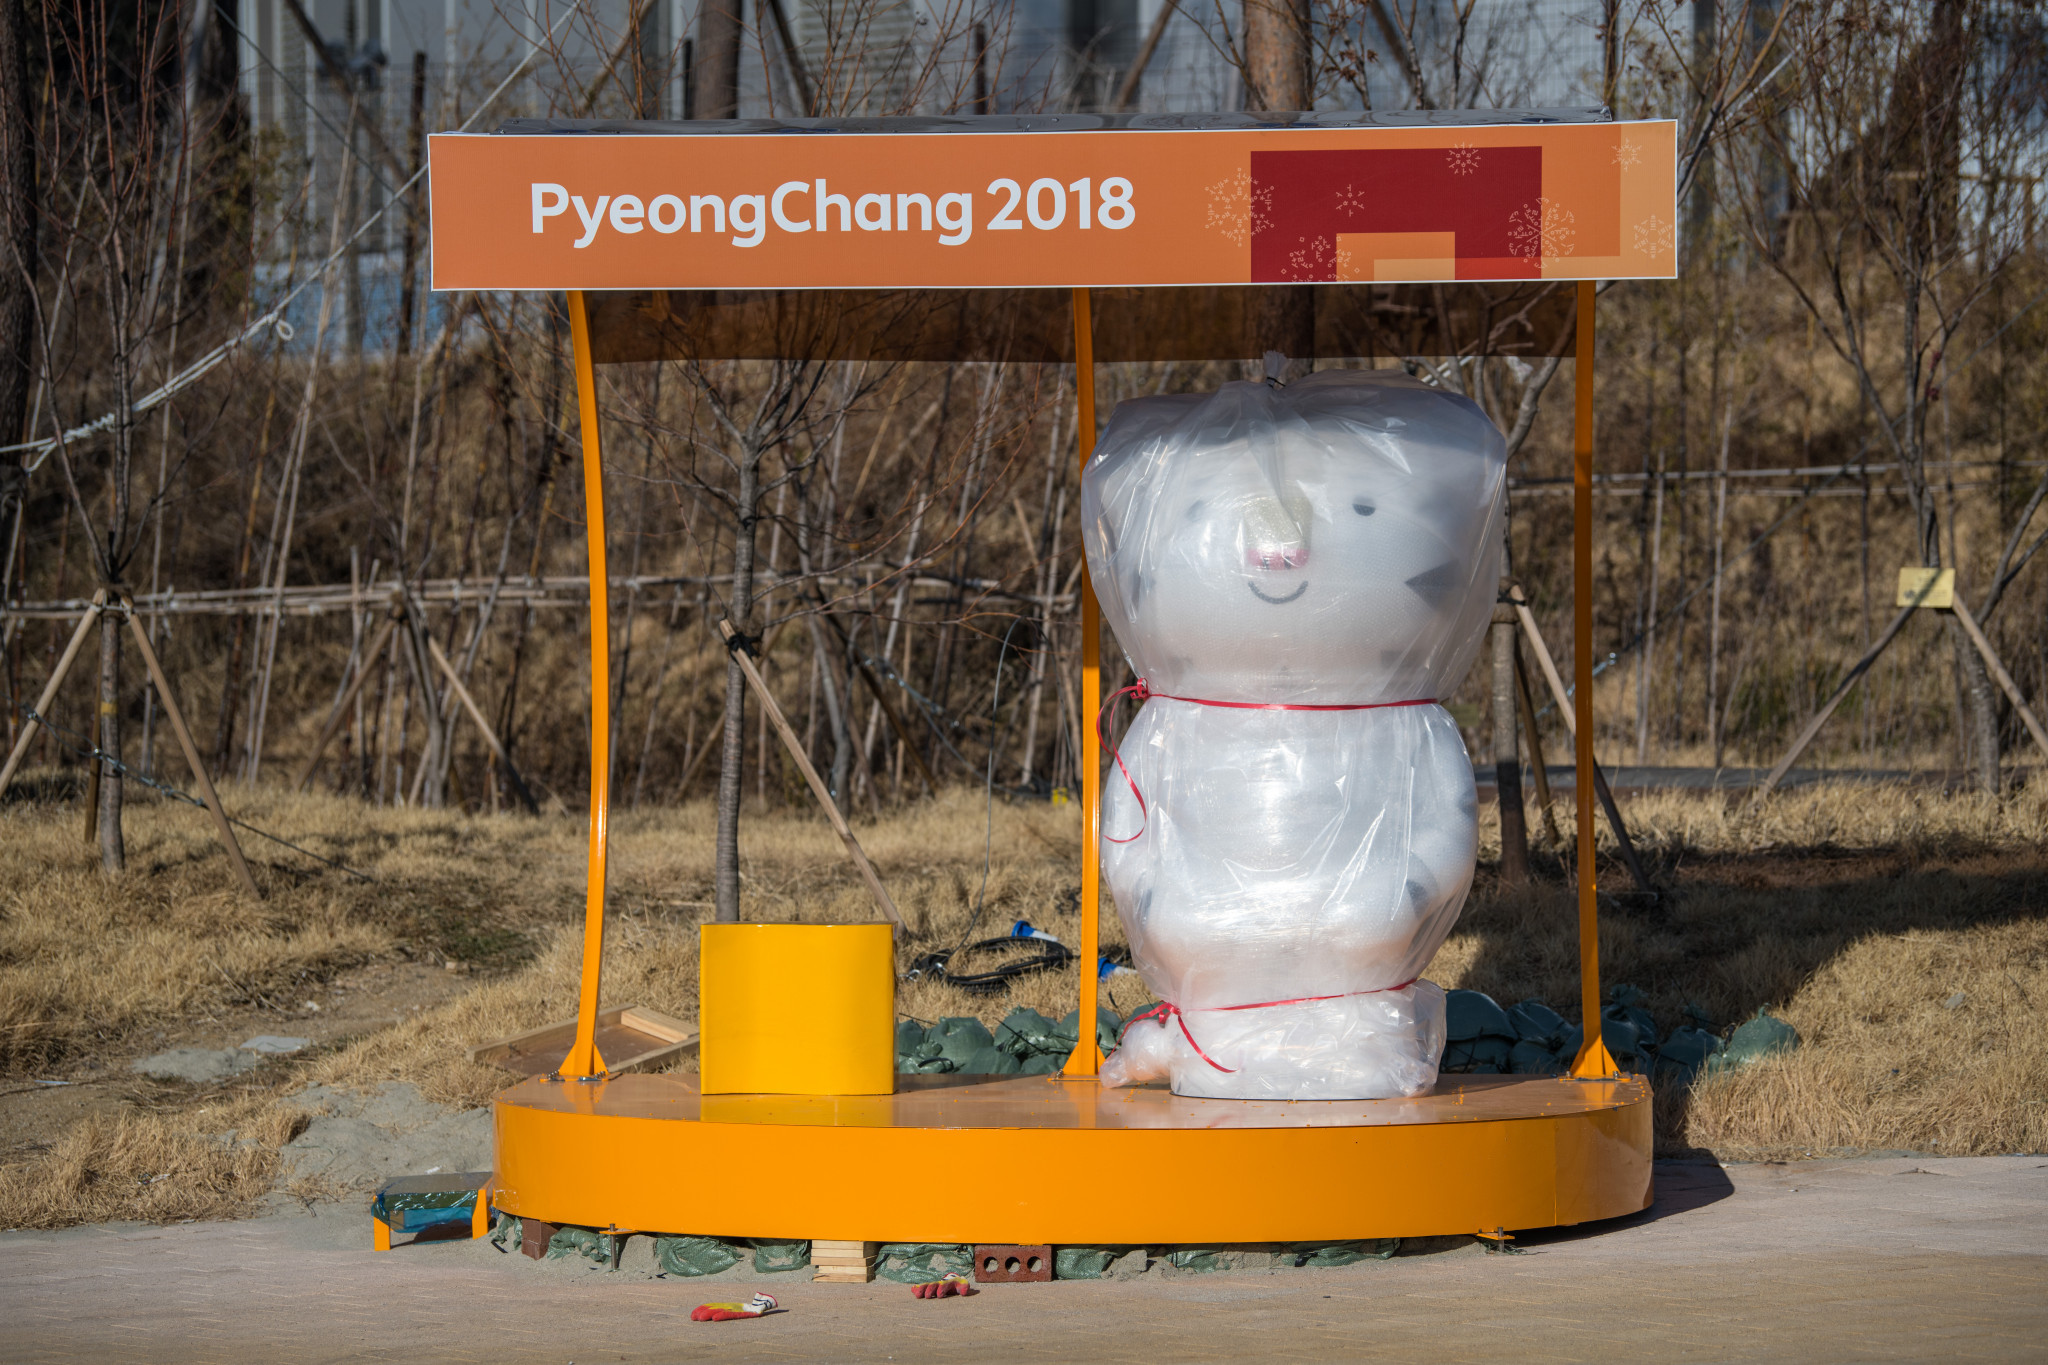 A Games mascot waits to be unwrapped in the Gangneung Coastal Cluster ©Getty Images